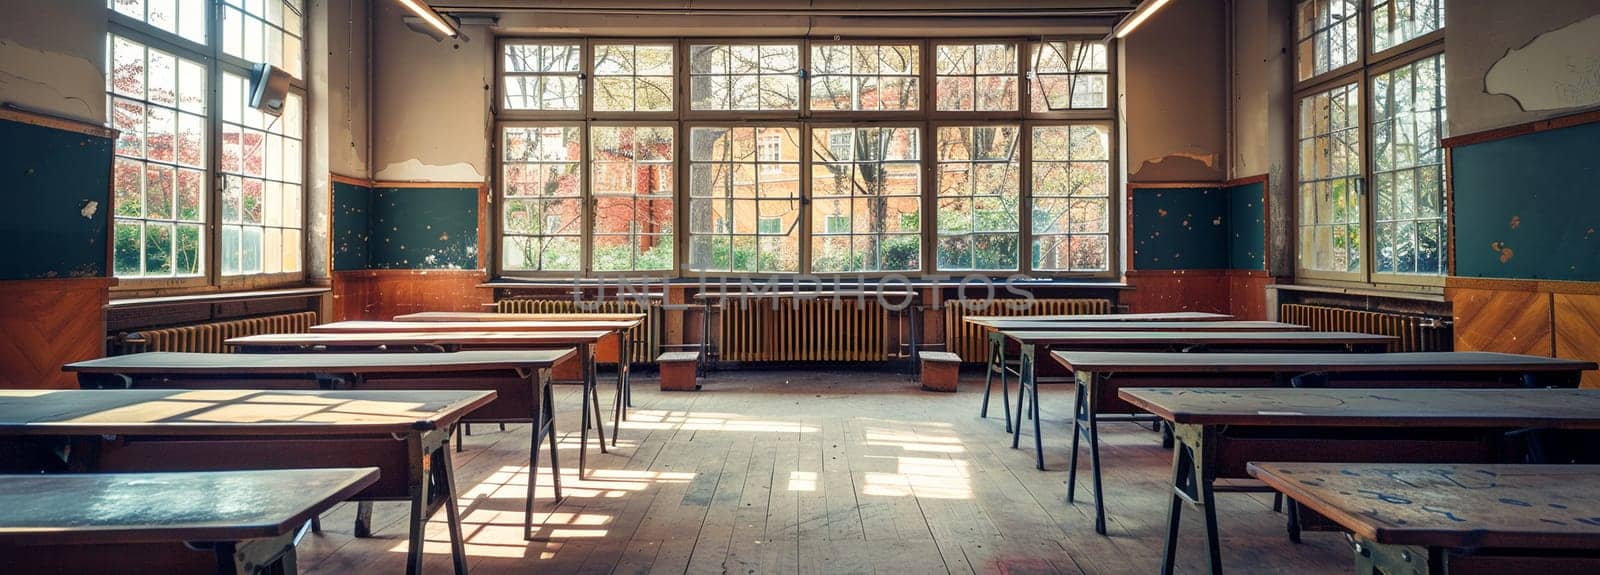 Vintage classroom interior with wooden desks and sunlight. Education school background by Yevhen89